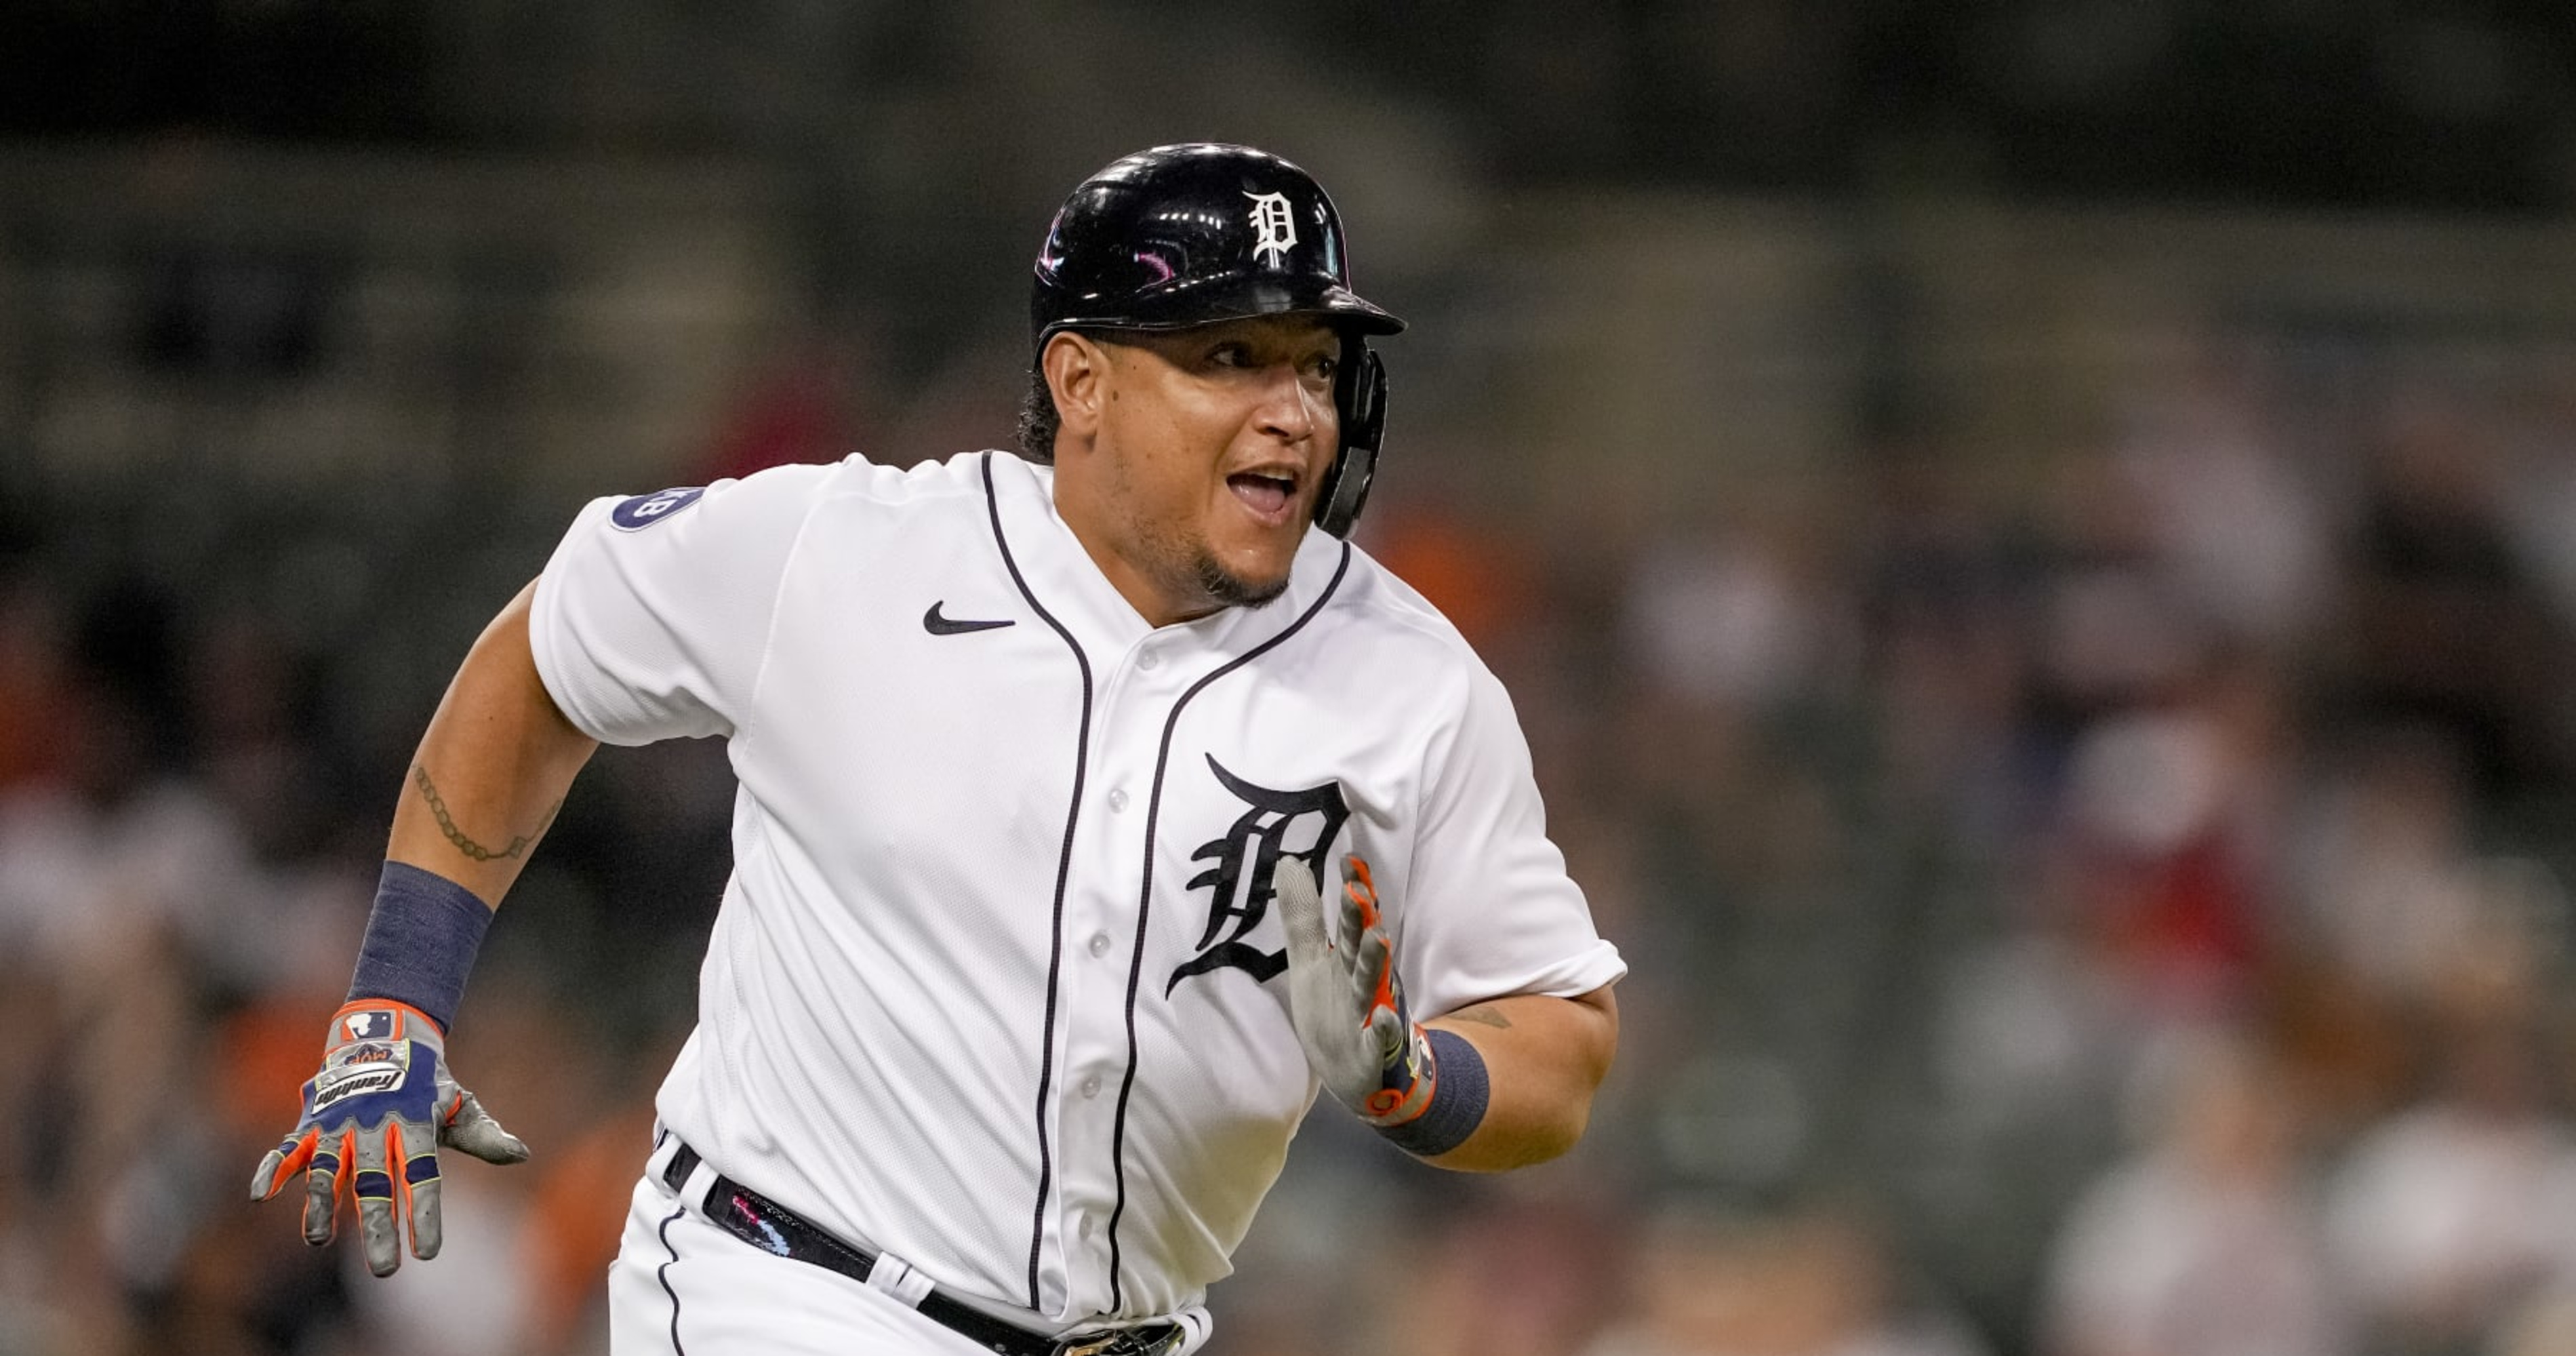 Tigers' Miguel Cabrera Undecided on Retirement: 'I Don't Feel Well Right Now'